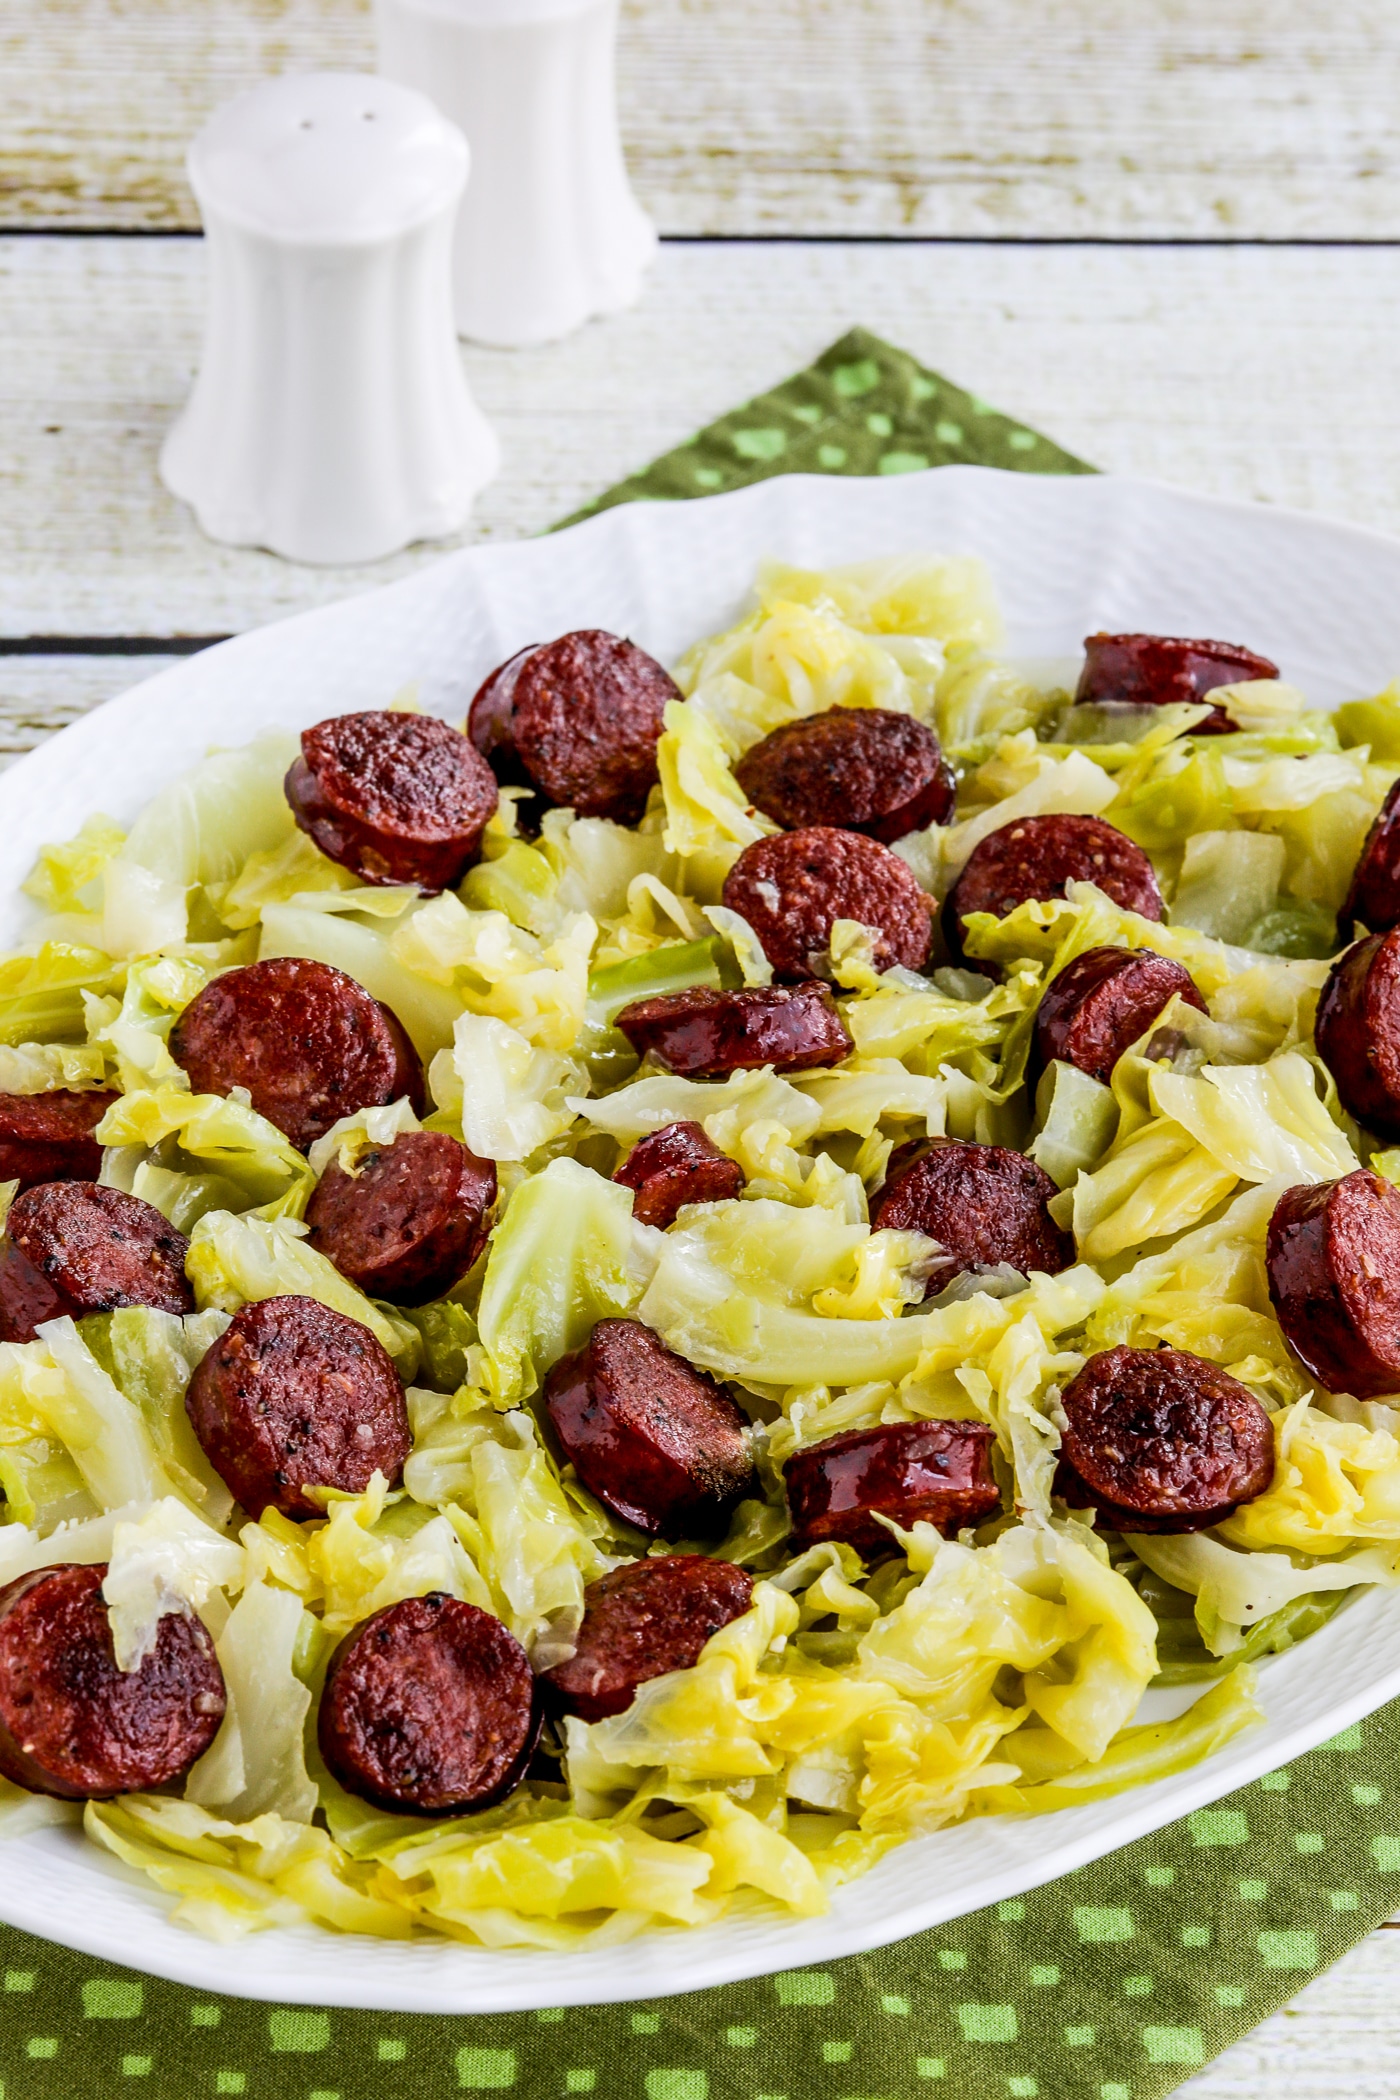 Finished dish of Instant Pot cabbage and sausage on a serving plate